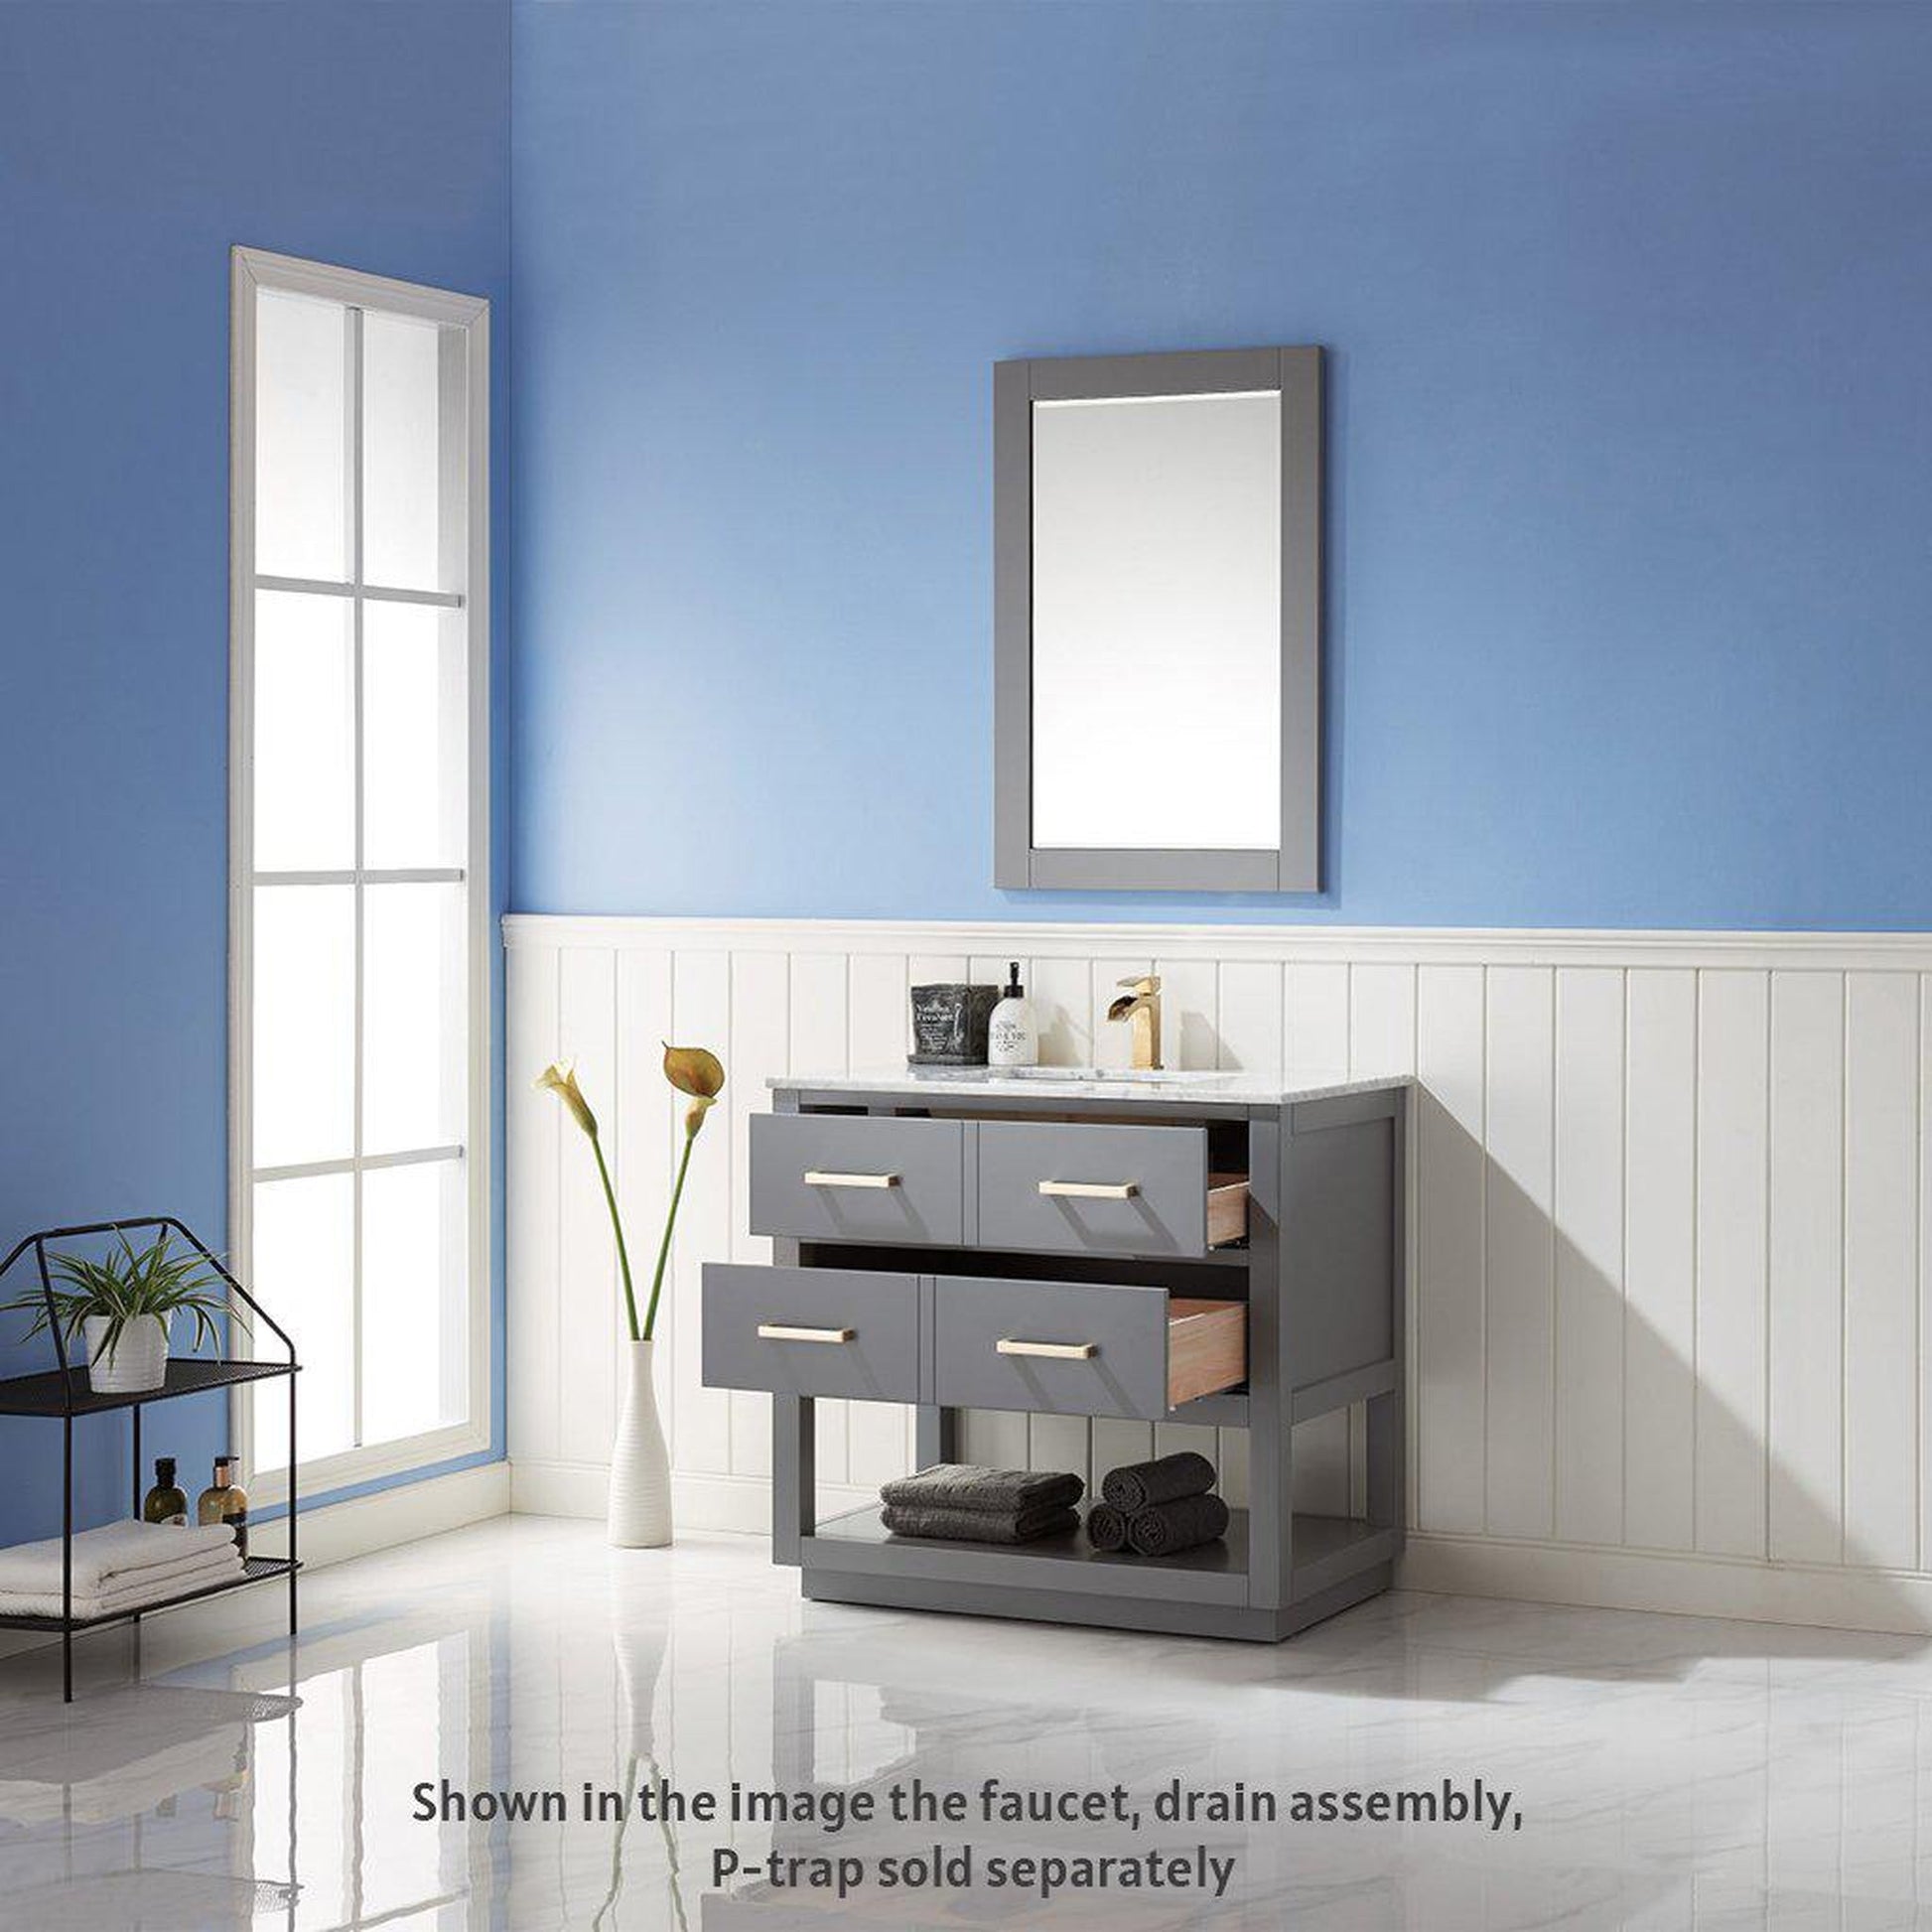 Altair Remi 36" Single Gray Freestanding Bathroom Vanity Set With Mirror, Natural Carrara White Marble Top, Rectangular Undermount Ceramic Sink, and Overflow